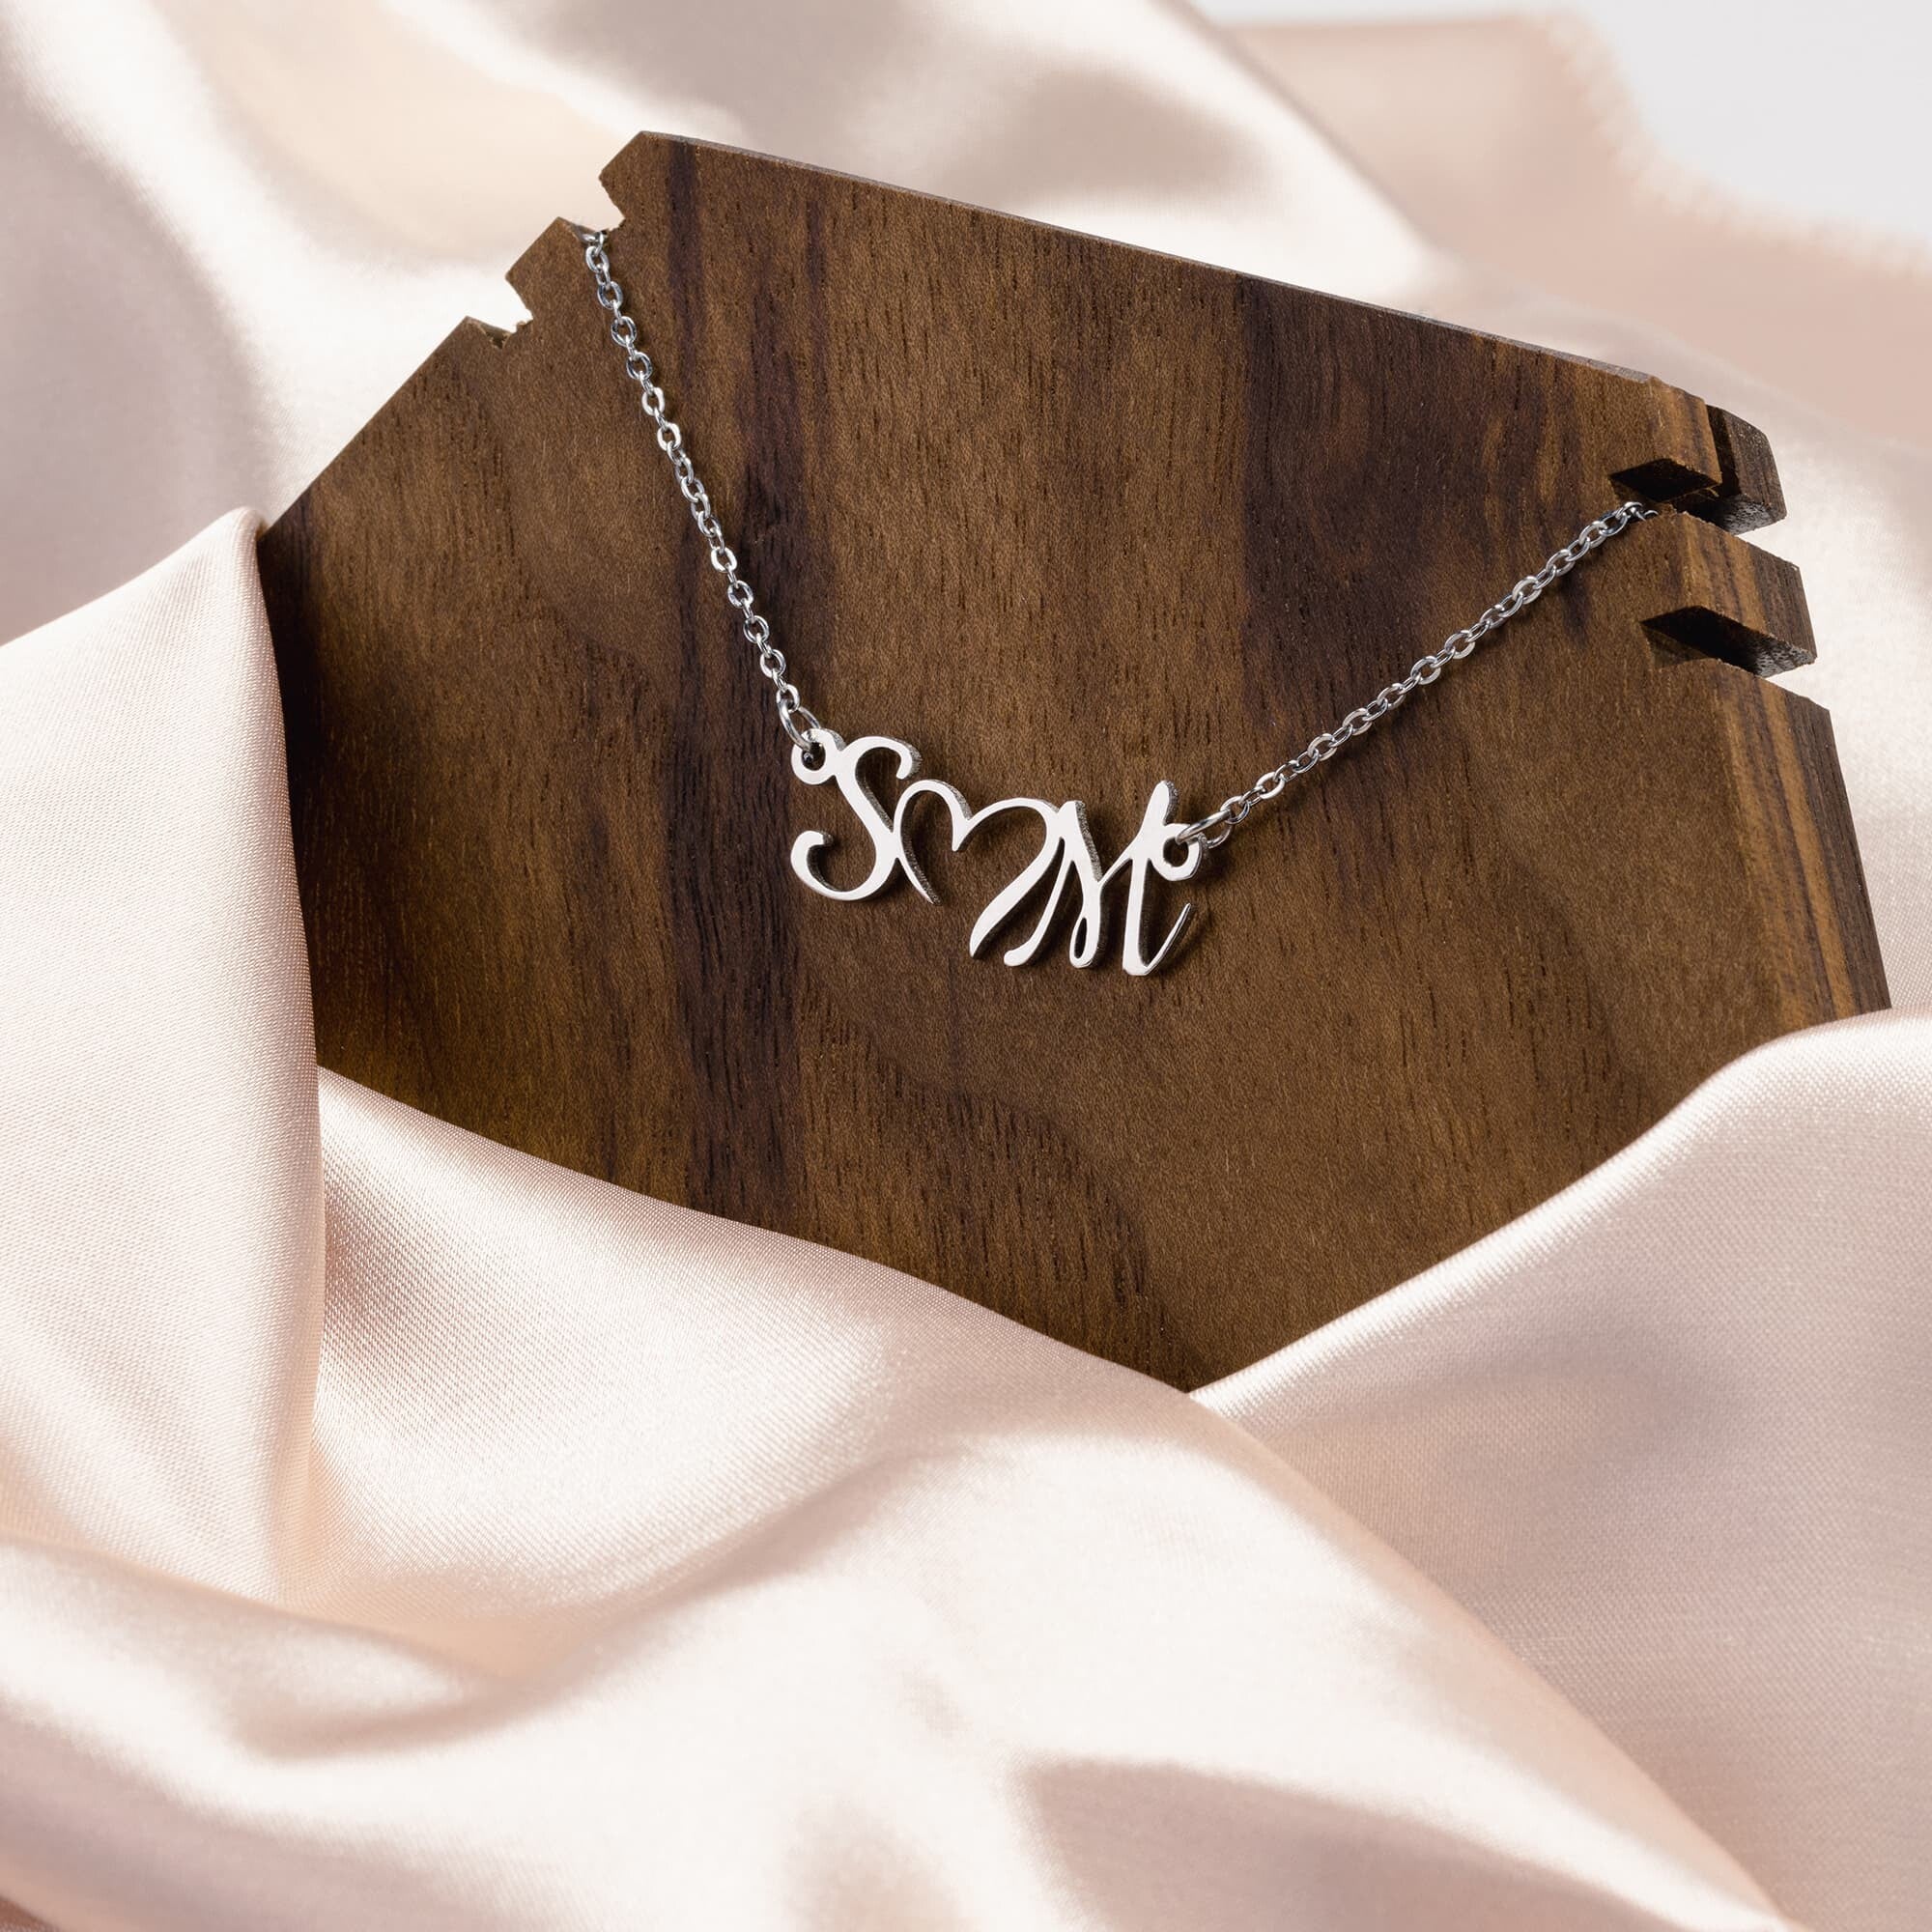 Magnetic Couple Necklaces with Custom Initial Letters